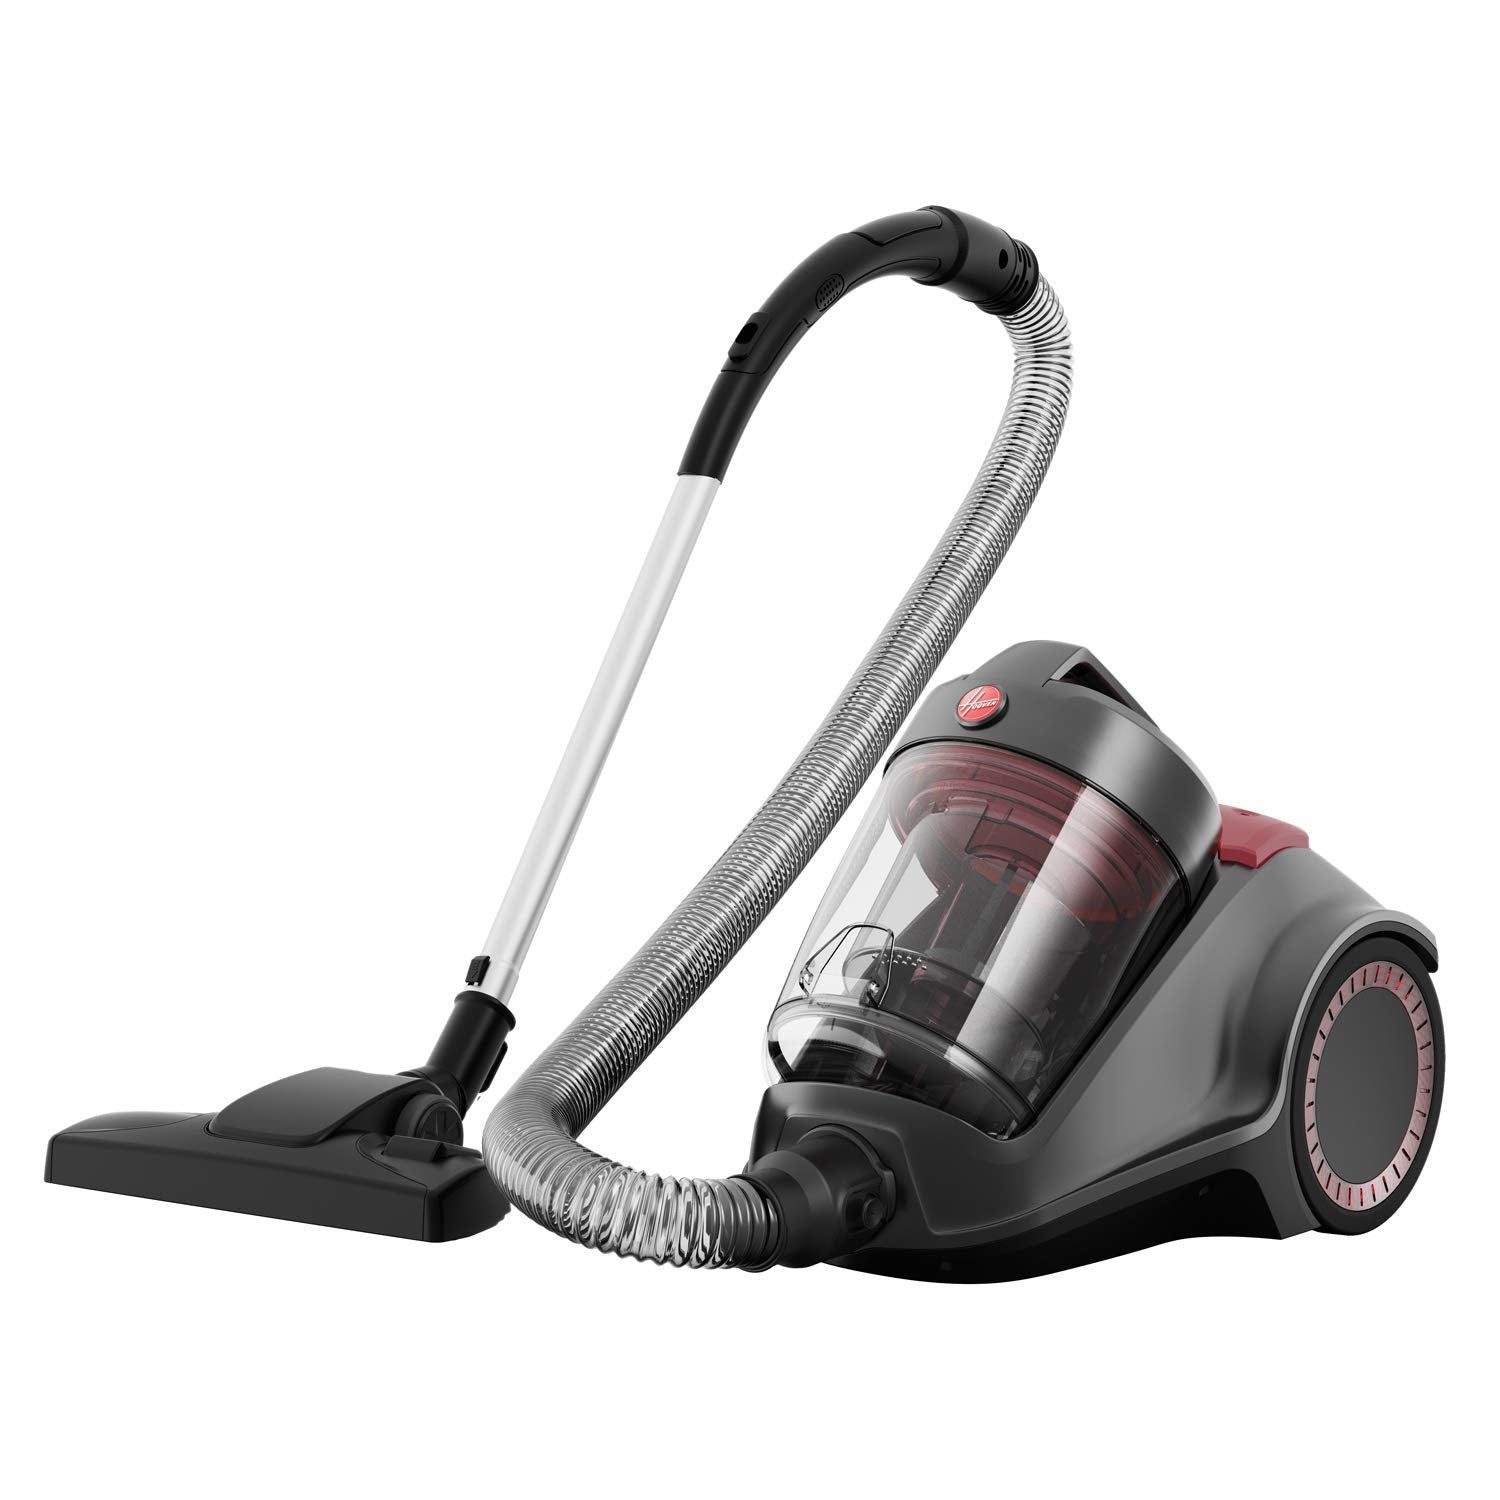 Hoover Power 6 Advanced Vaccum Cleaner Grey-Red 2200W